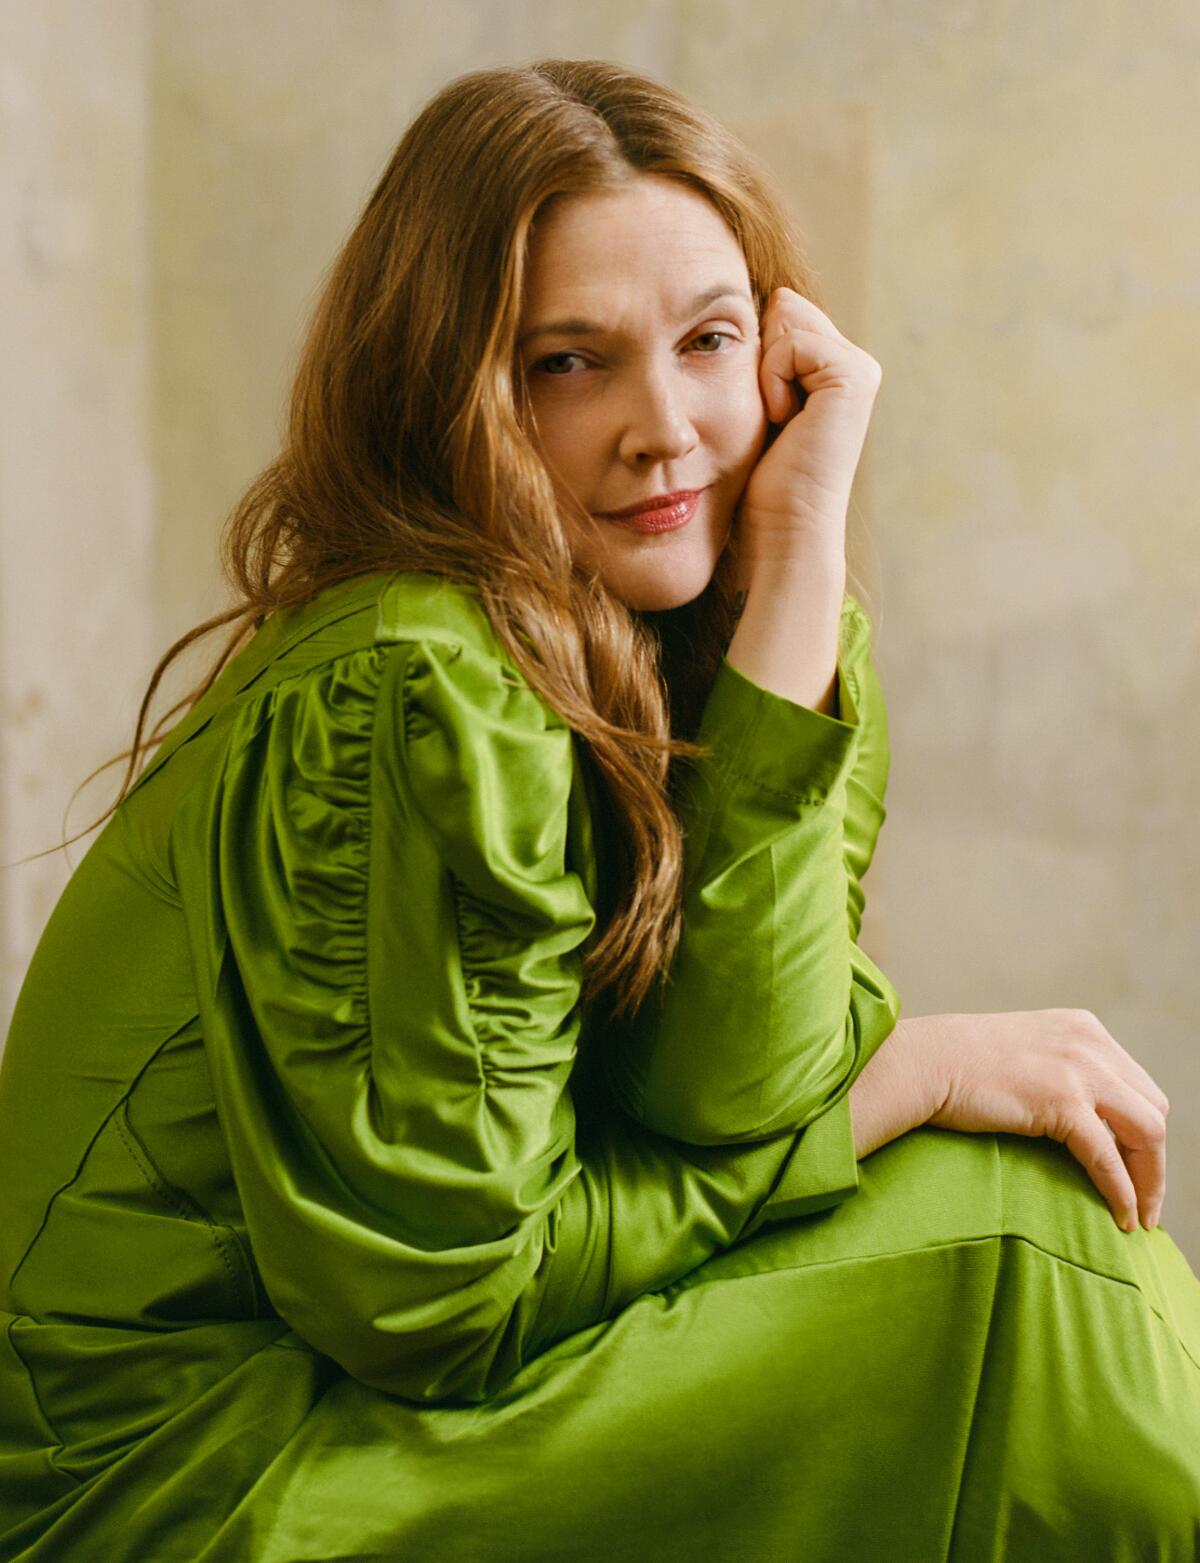 Drew Barrymore sits sideways in a shiny green outfit with arms crossed and one hand by her left cheek.